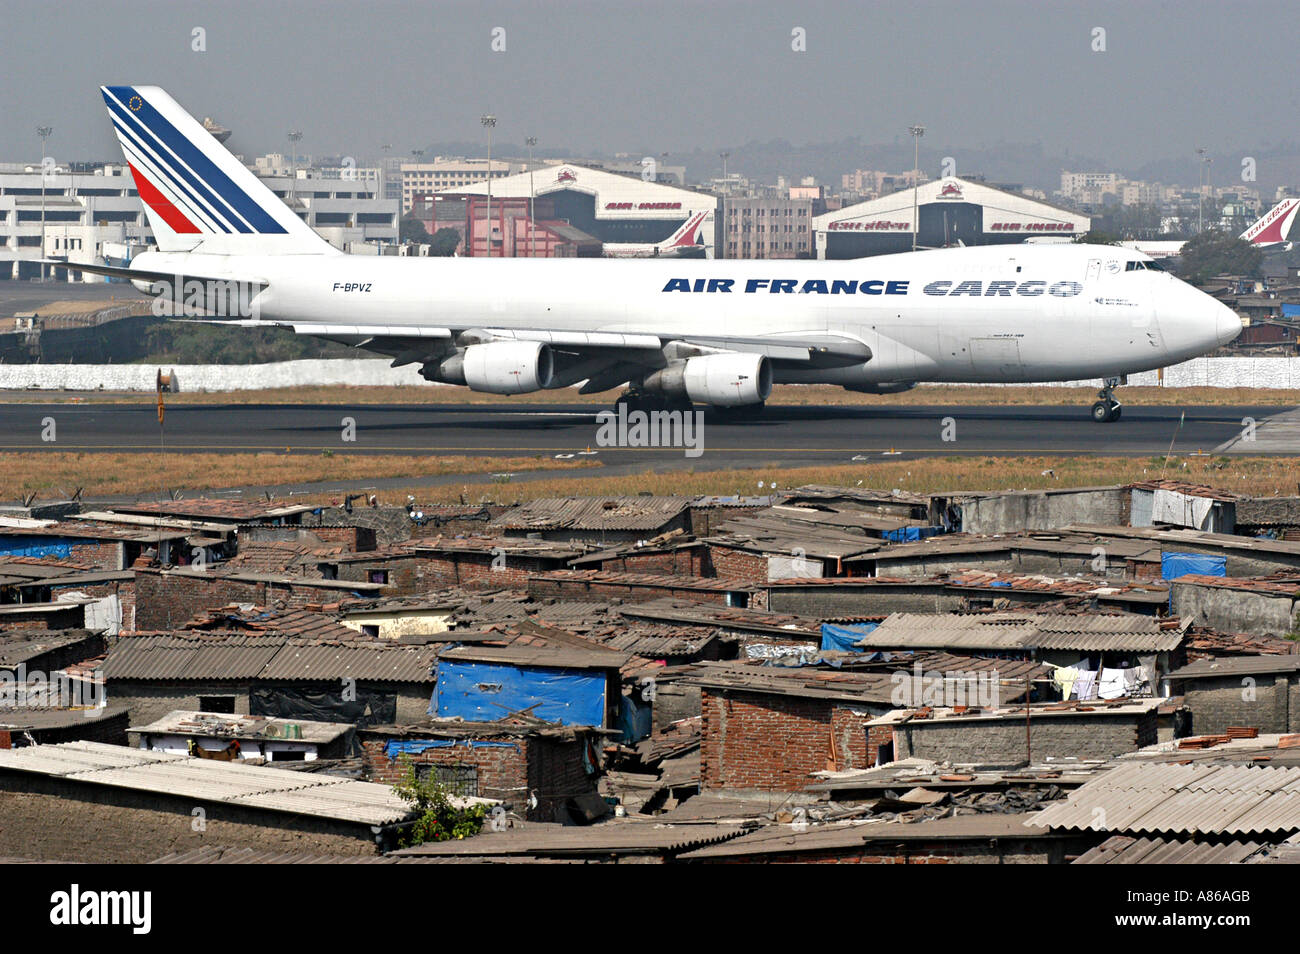 bombay-airport-with-air-france-cargo-aeroplane-and-slums-in-mumbai-A86AGB.jpg